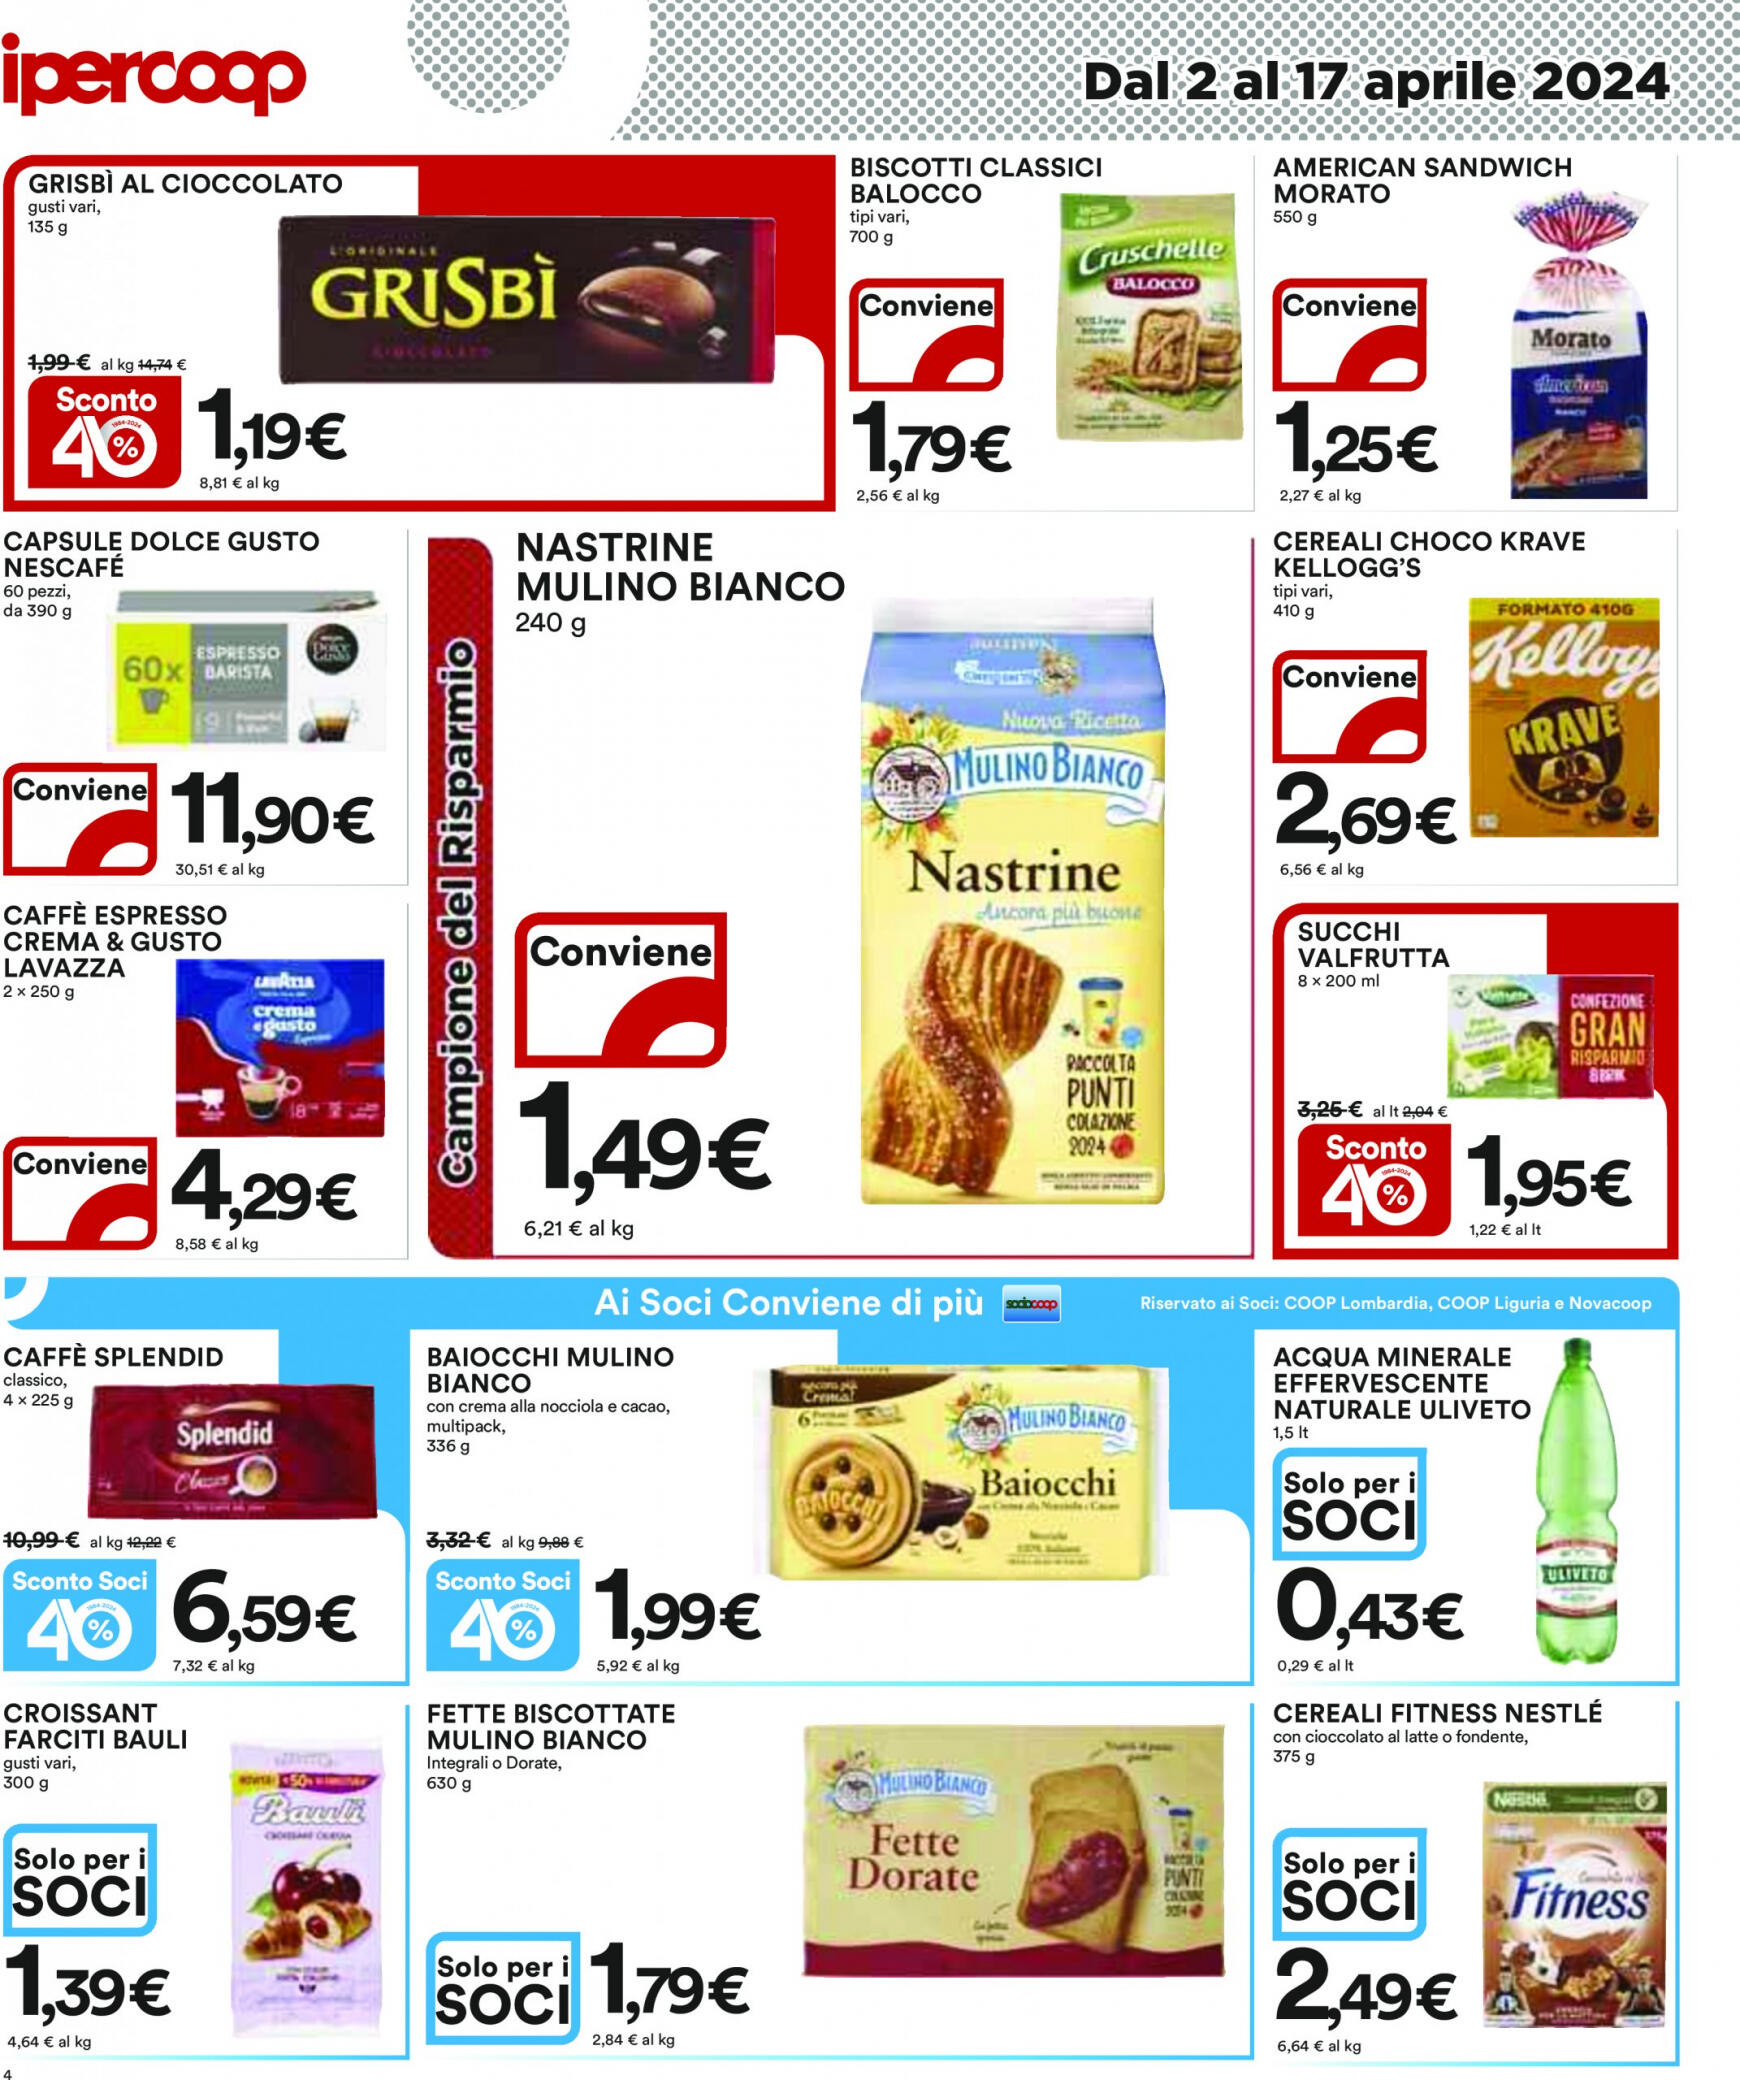 coop - Nuovo volantino Coop 02.04. - 17.04. - page: 4